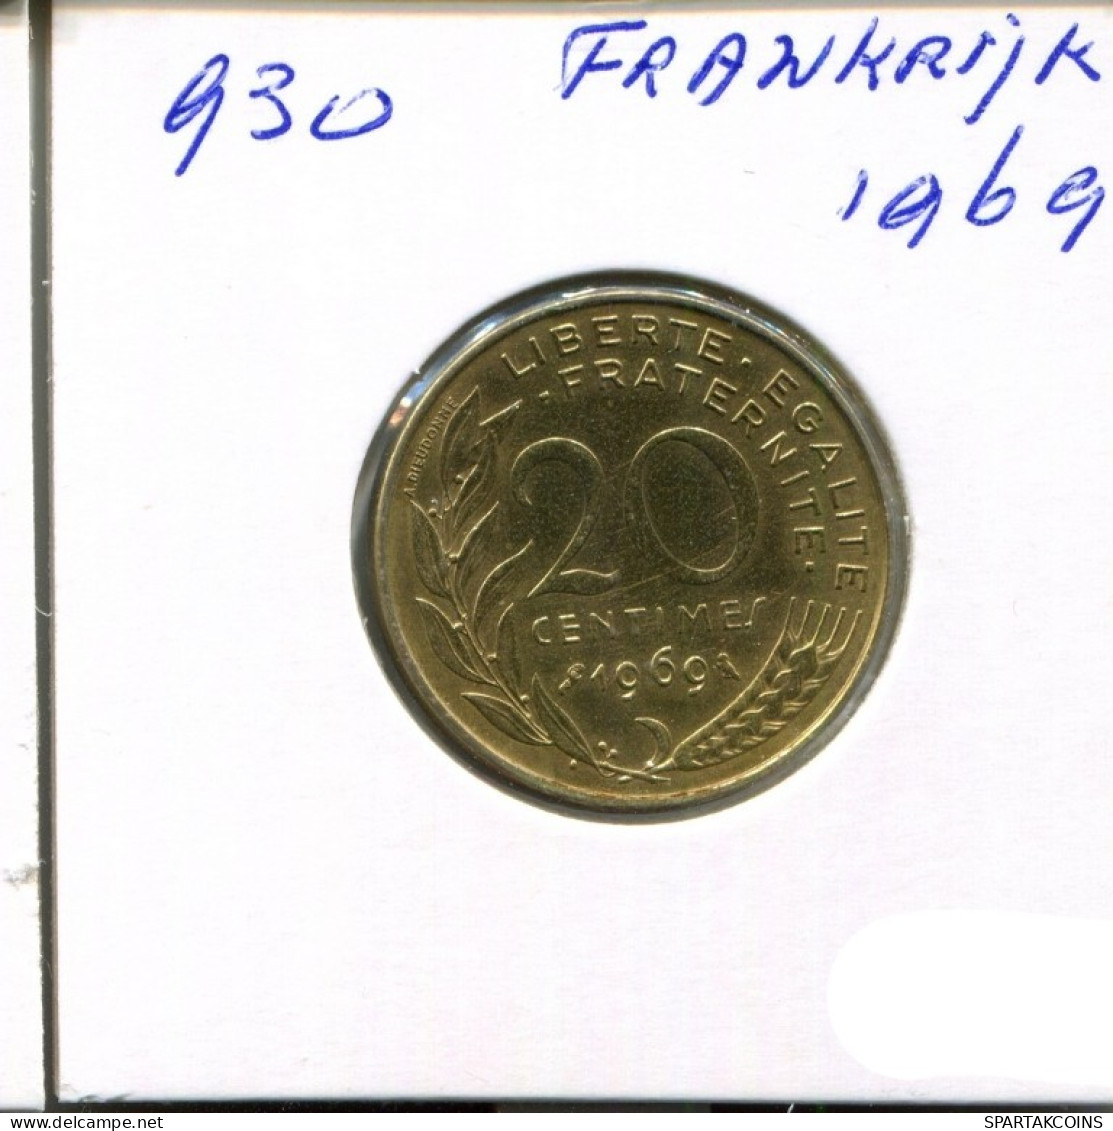 20 CENTIMES 1969 FRANCE Coin French Coin #AN172.U.A - 20 Centimes